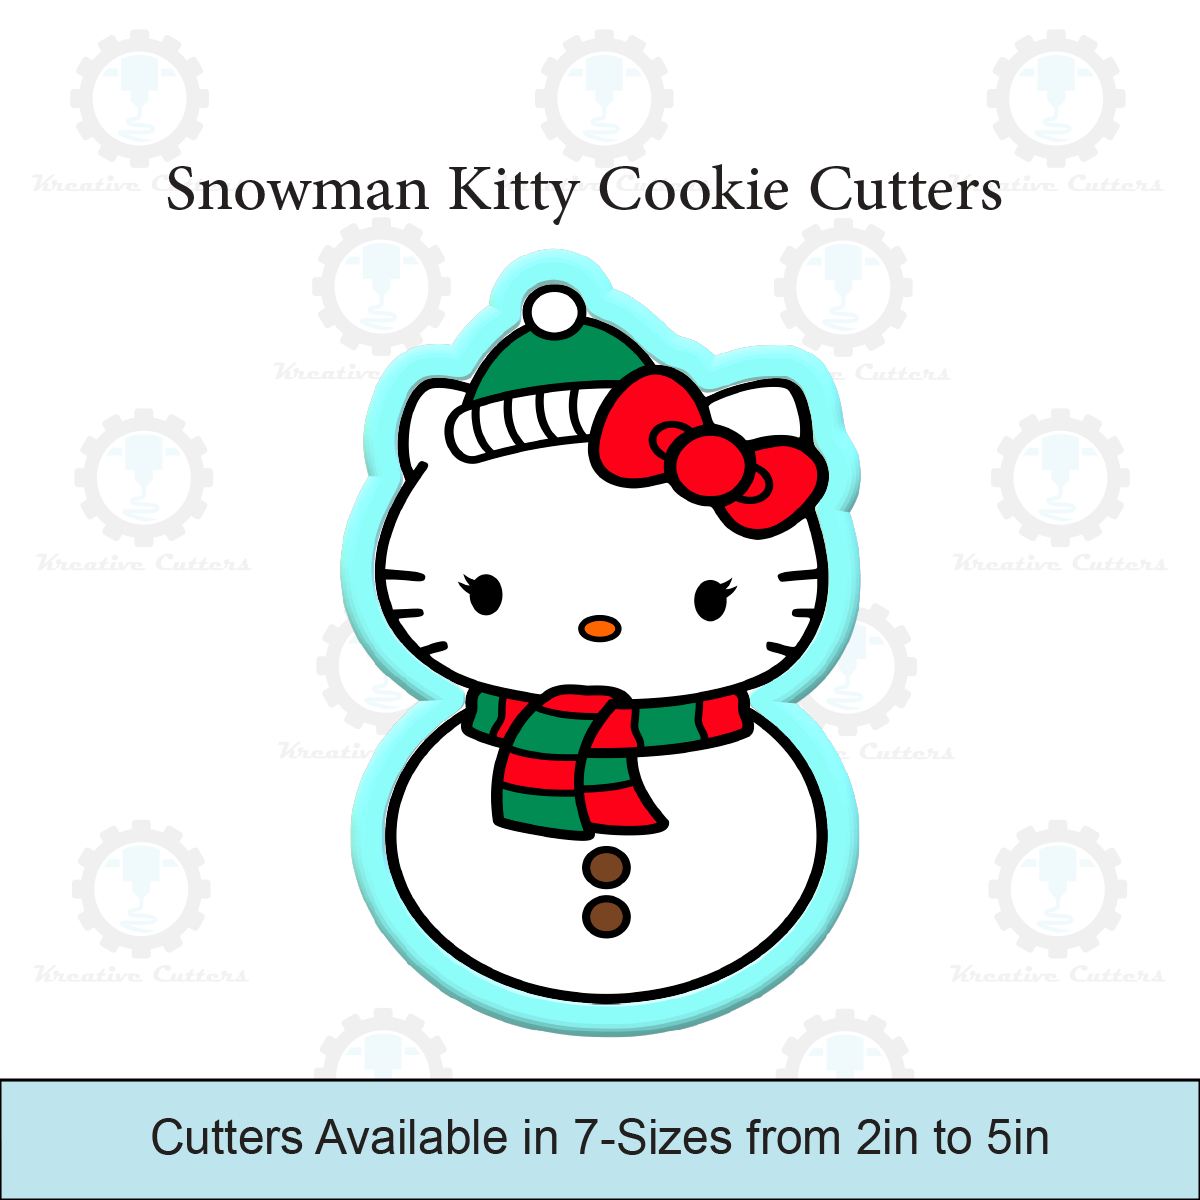 Snowman Kitty Cookie Cutters